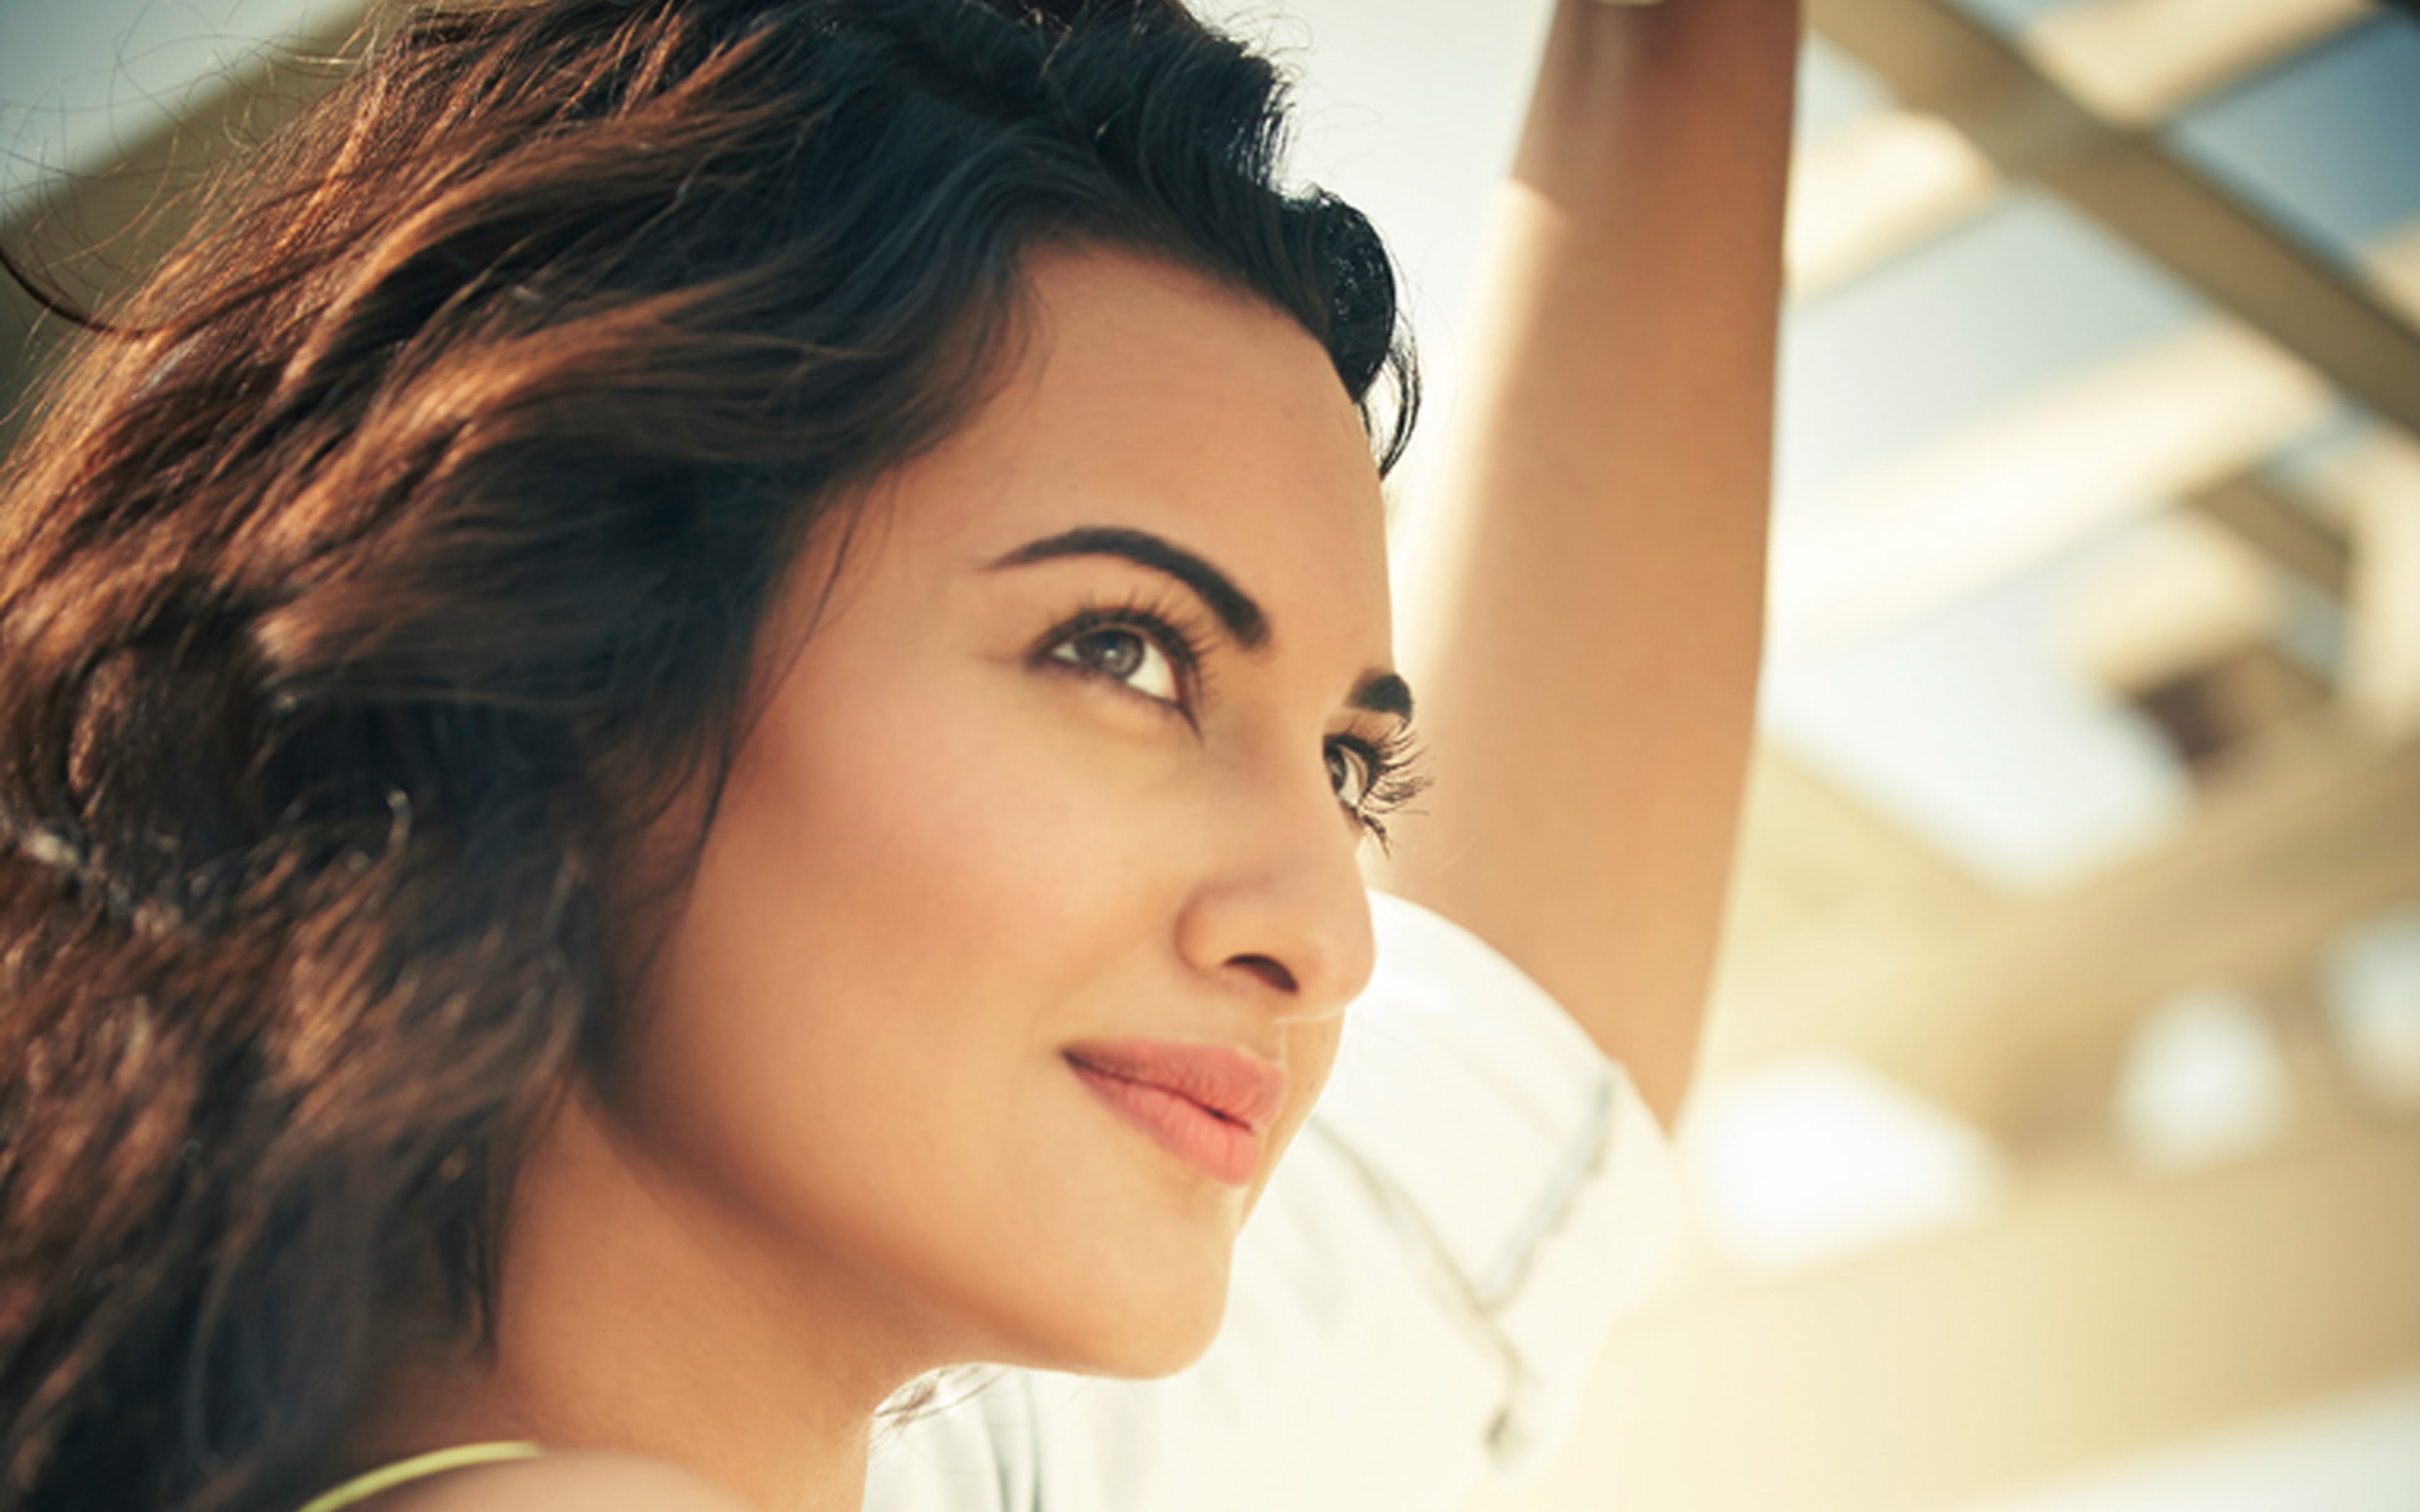 Sonakshi Sinha Face 2017, portrait, young adult, hairstyle, beautiful woman